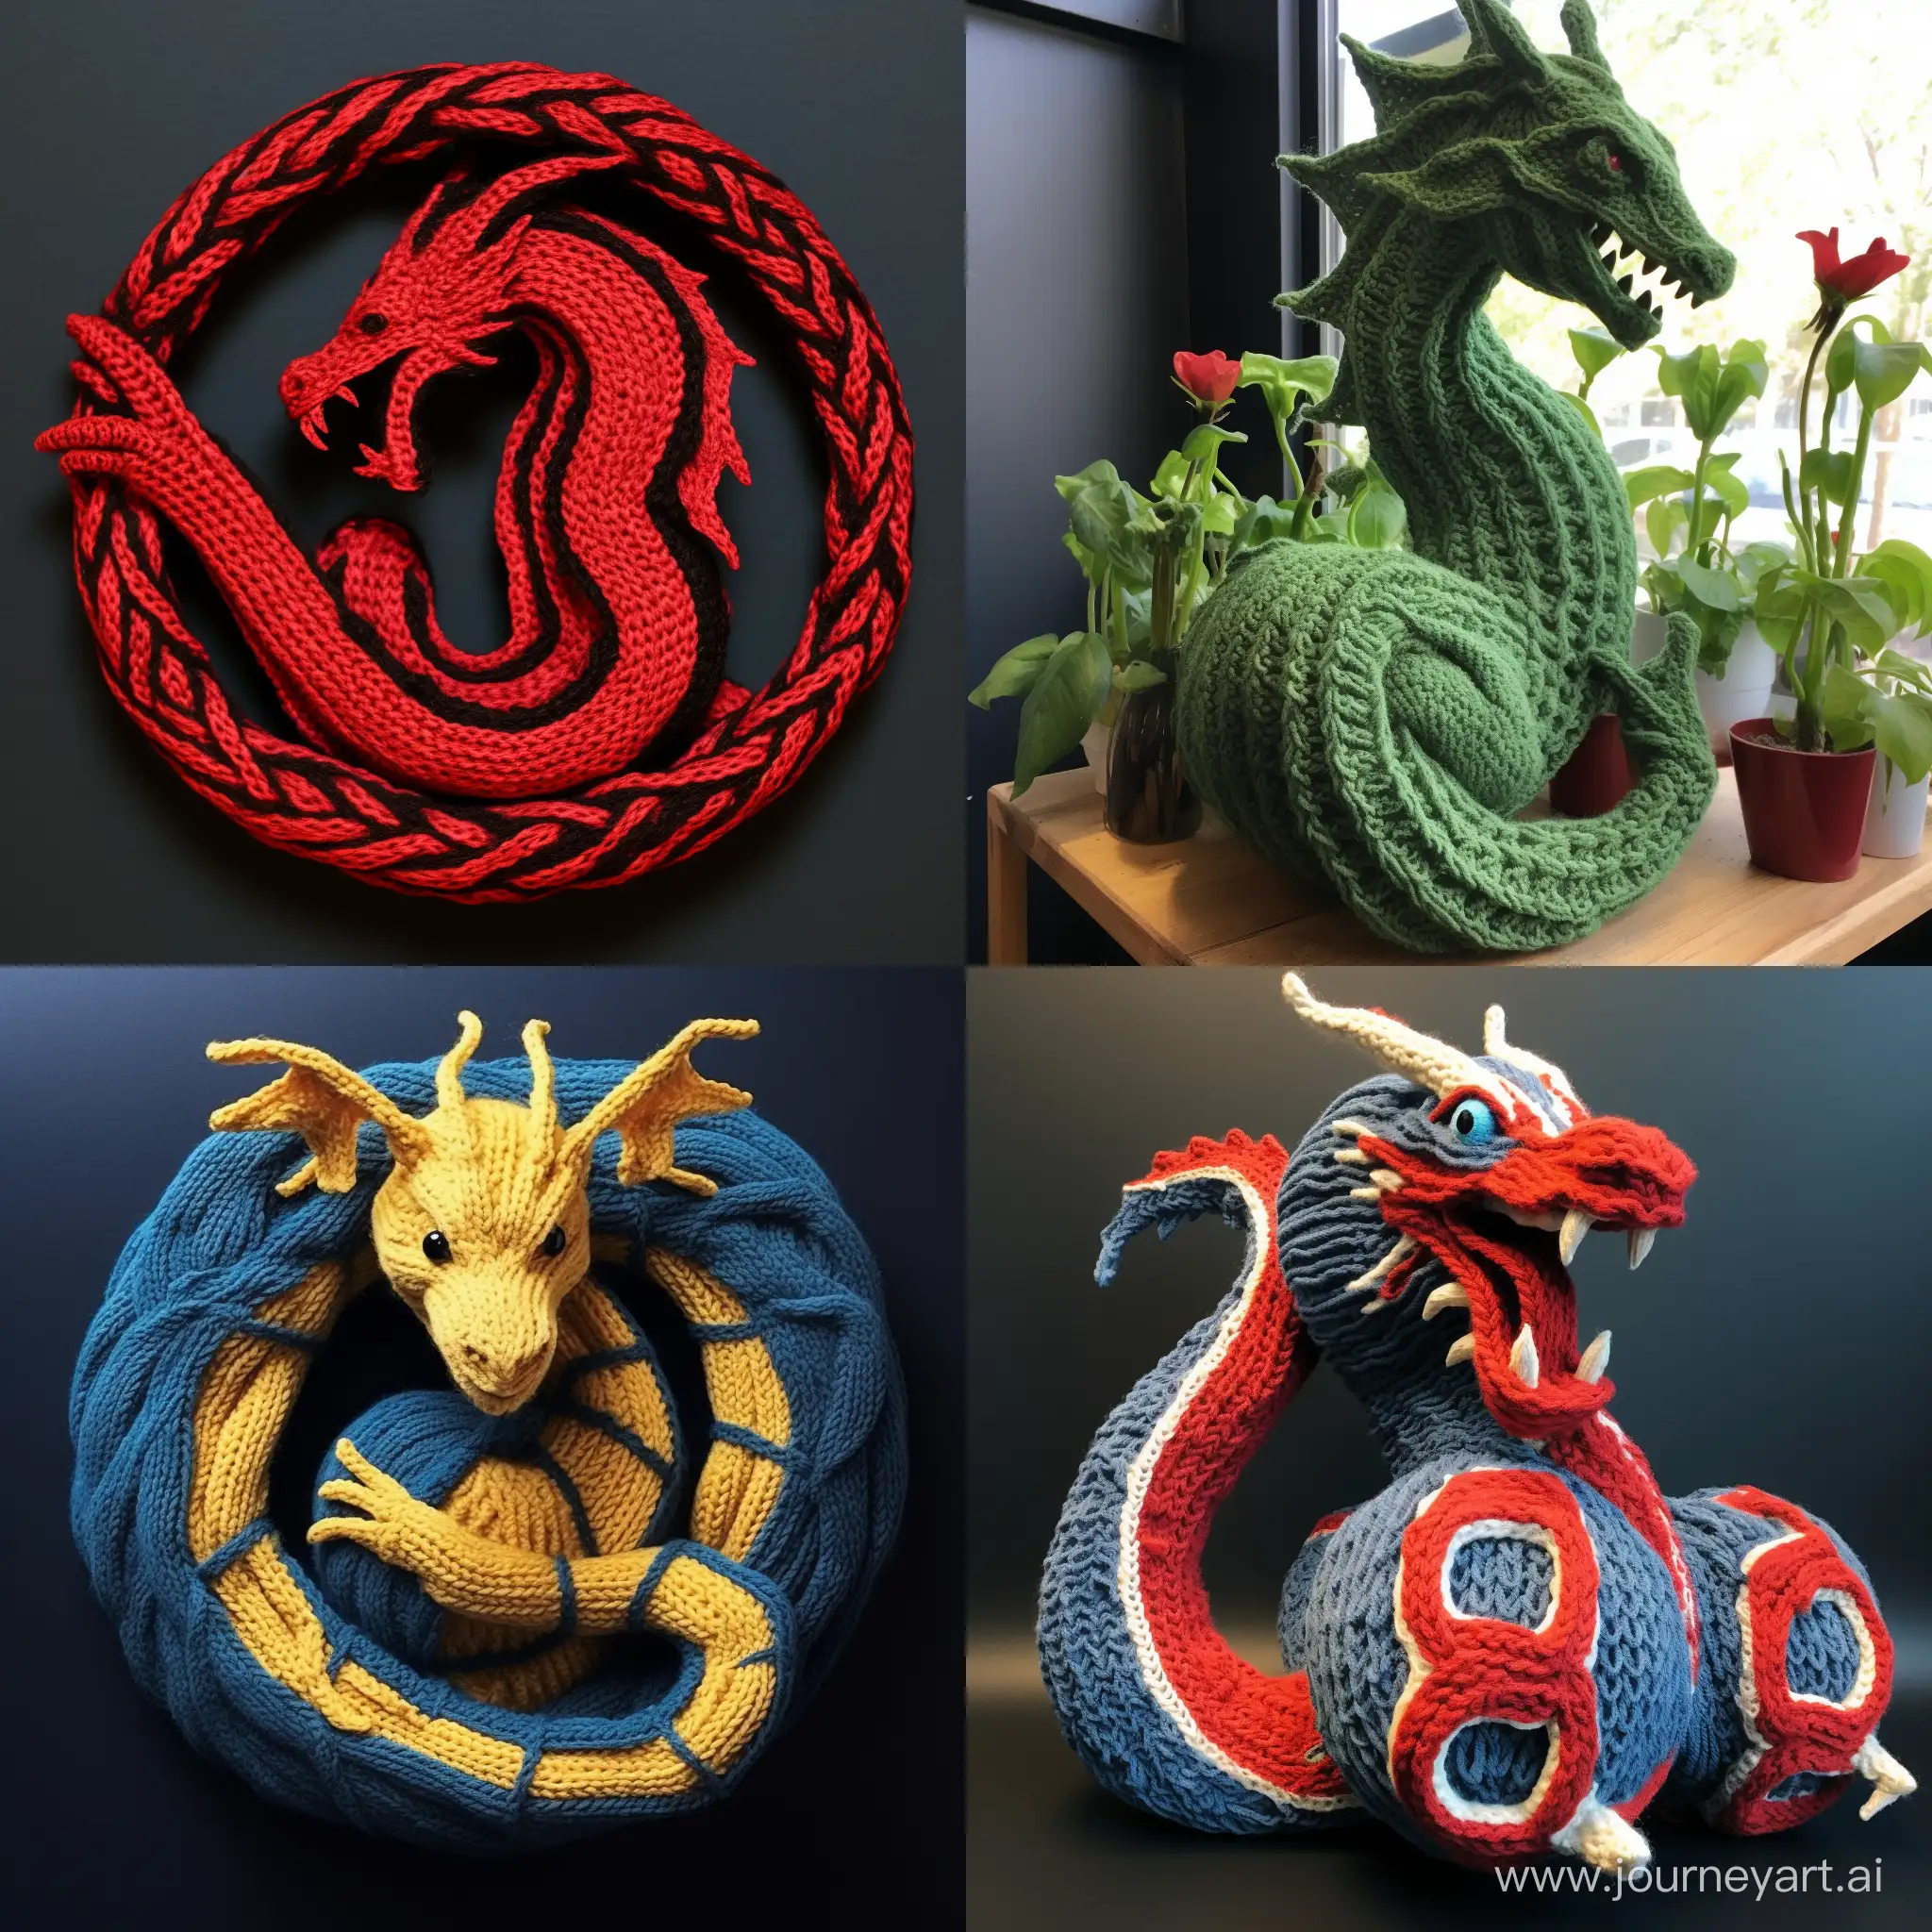 Enchanting-Knitted-Dragon-in-Captivating-Yarn-Art-Style